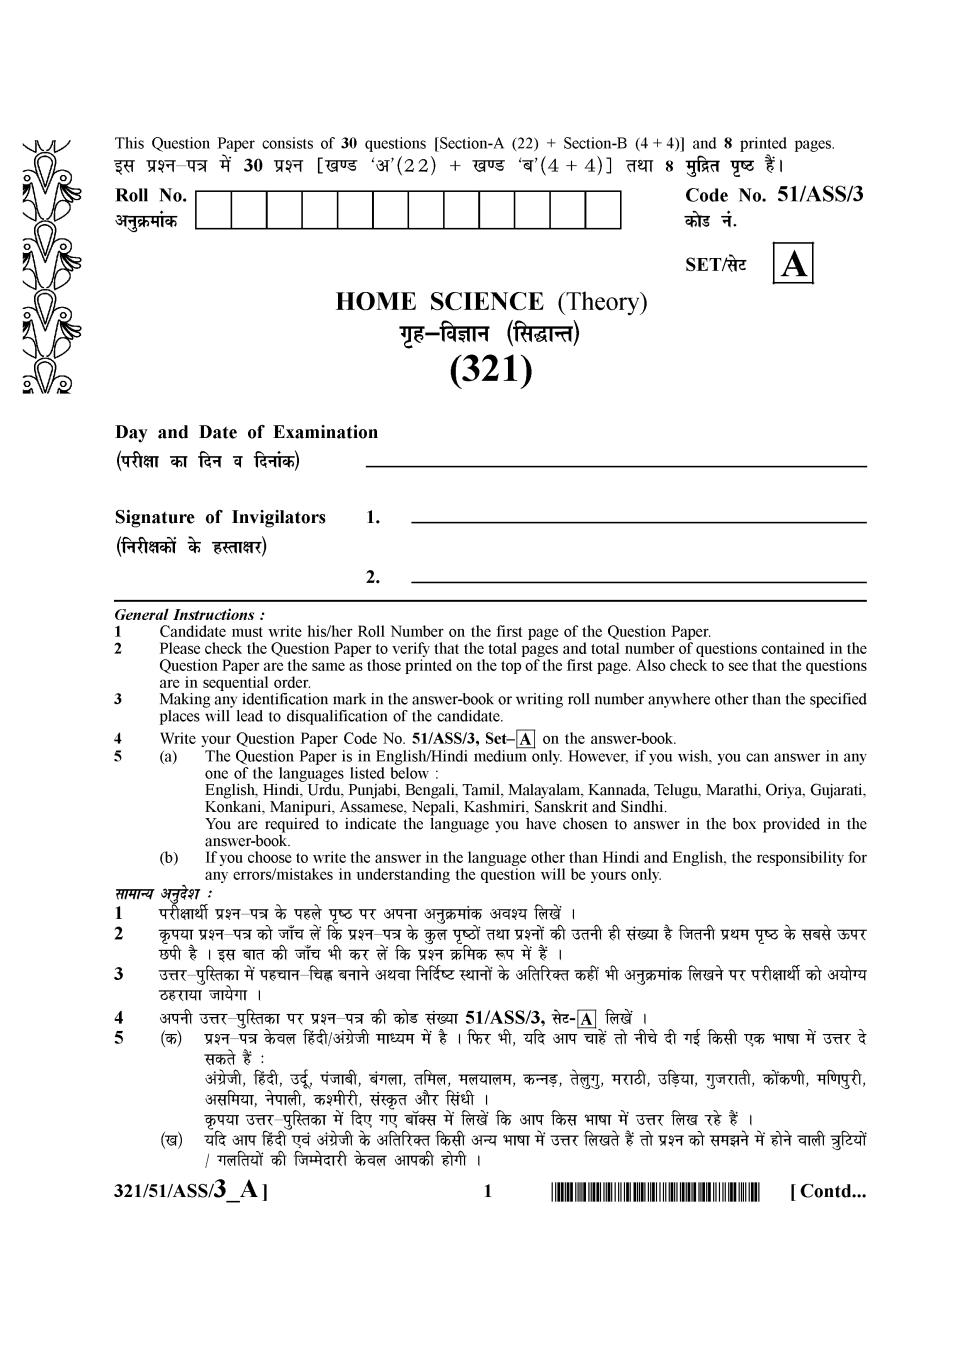 NIOS Class 12 Question Paper Oct 2015 - Home Science Theory - Page 1